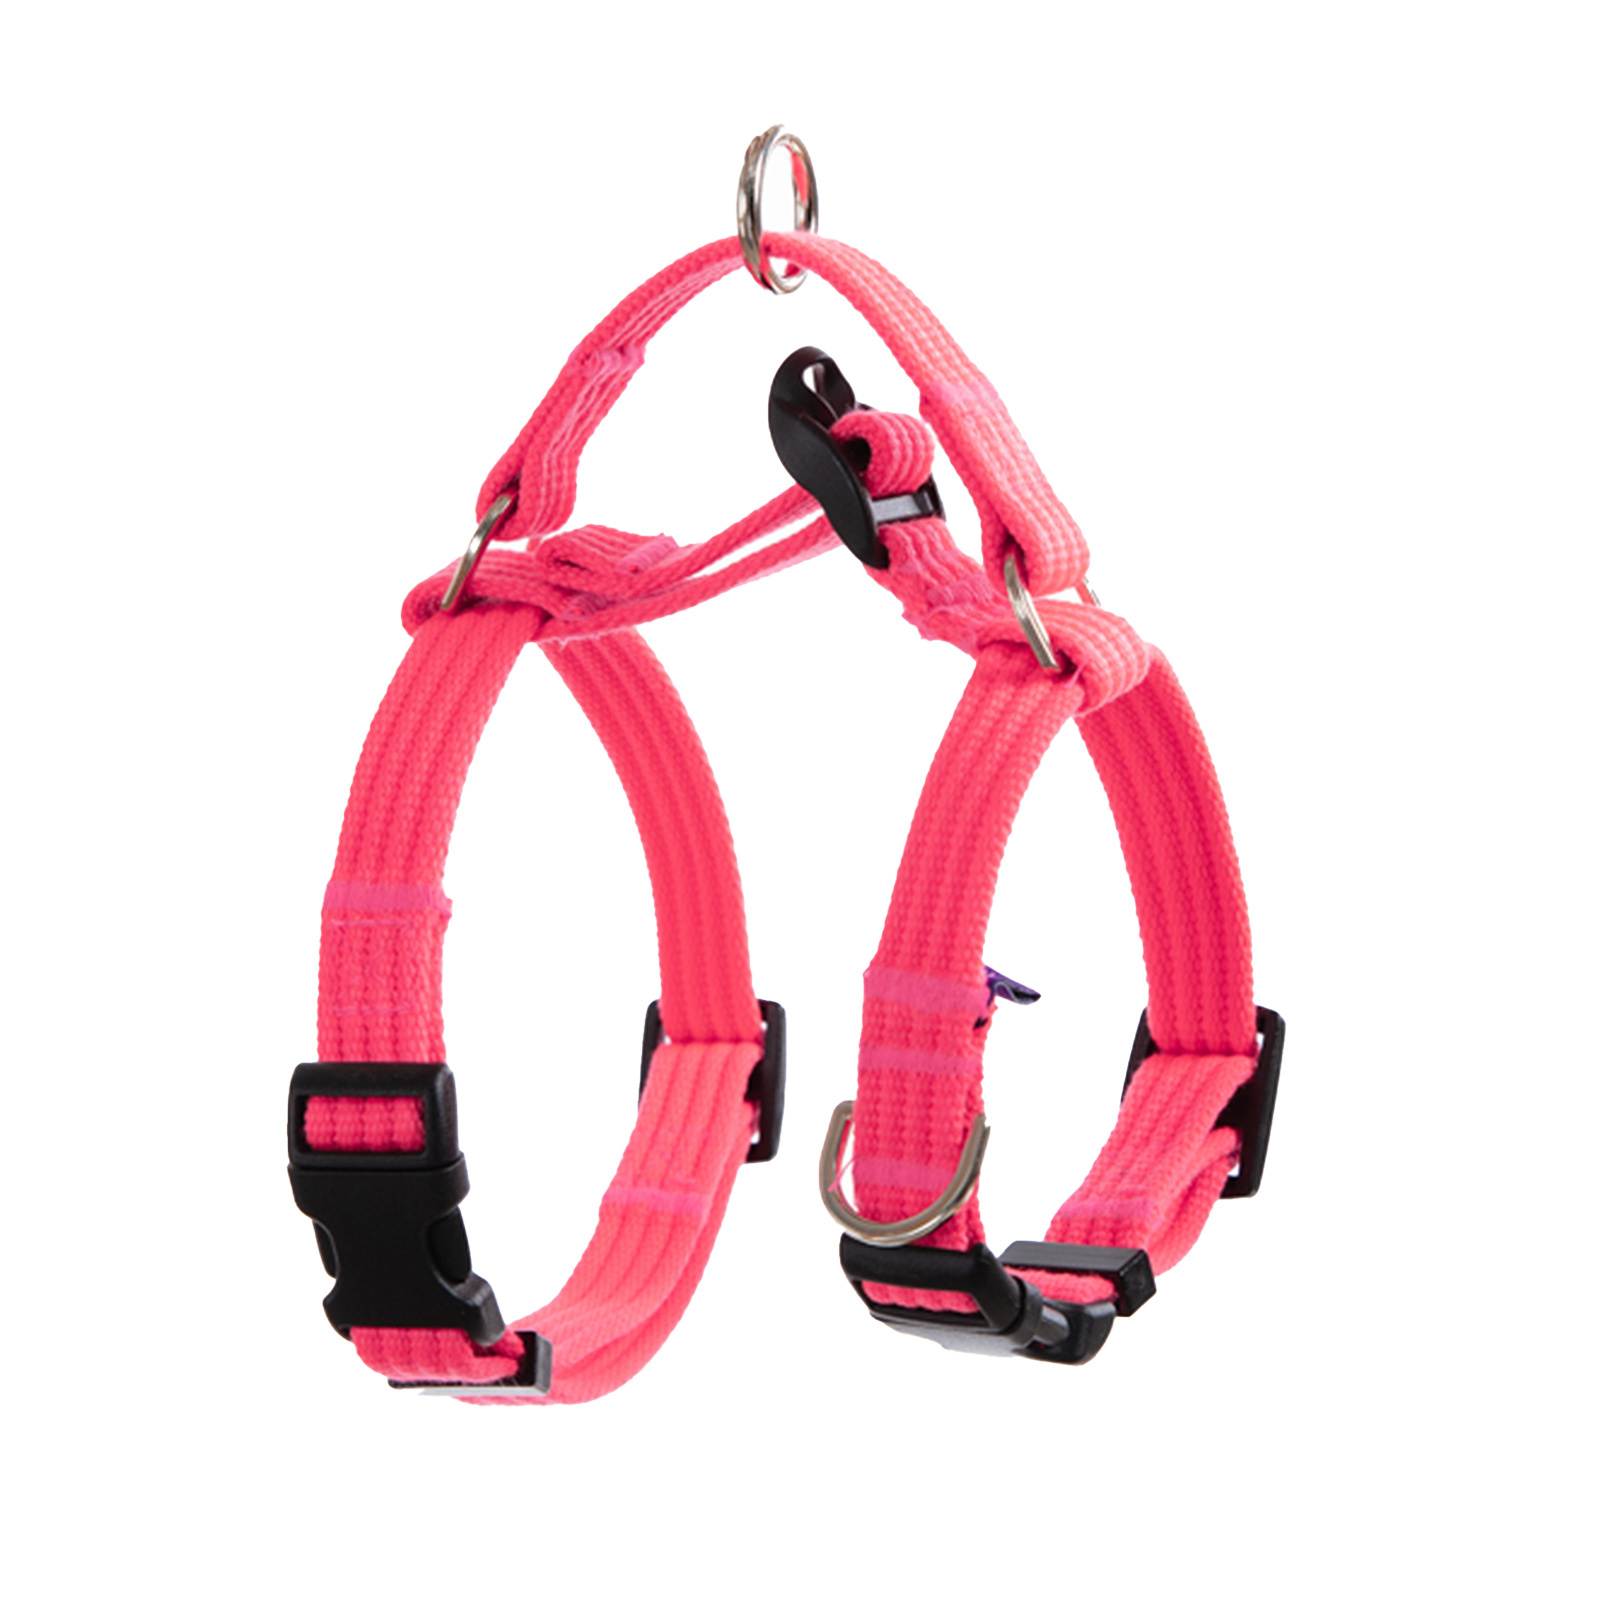 Double-Lined Straps Harness and Lead Set M - NEON CAROL-PINK